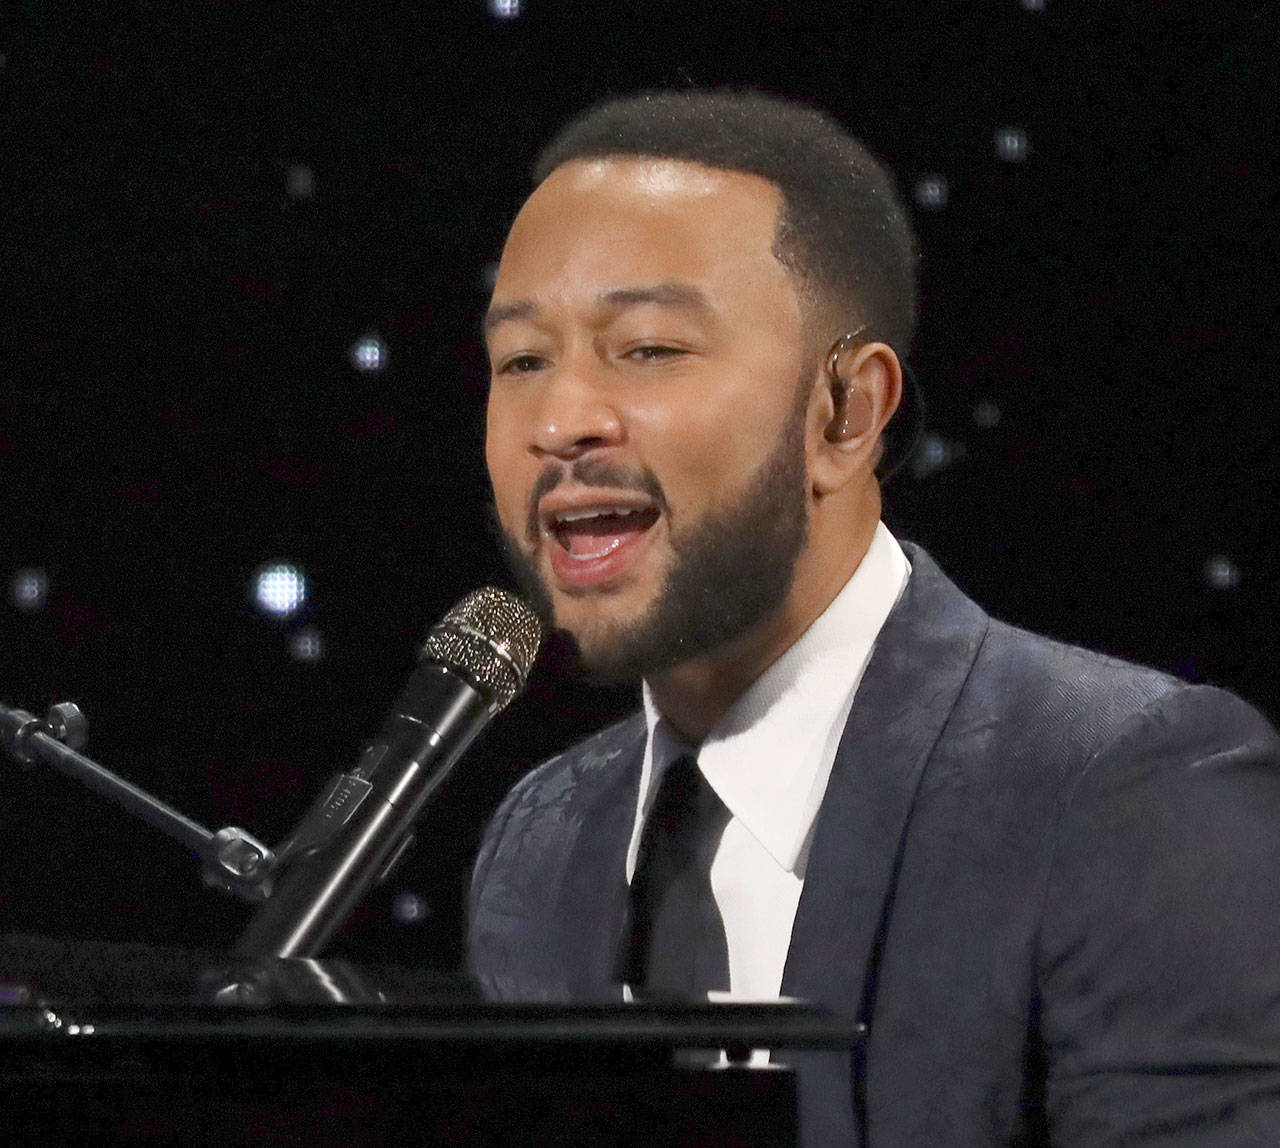 All of the big summer shows have been canceled or postponed, but John Legend’s concert set for Sept. 10-11 at Chateau Ste. Michelle Winery is still on the schedule. (Associated Press)